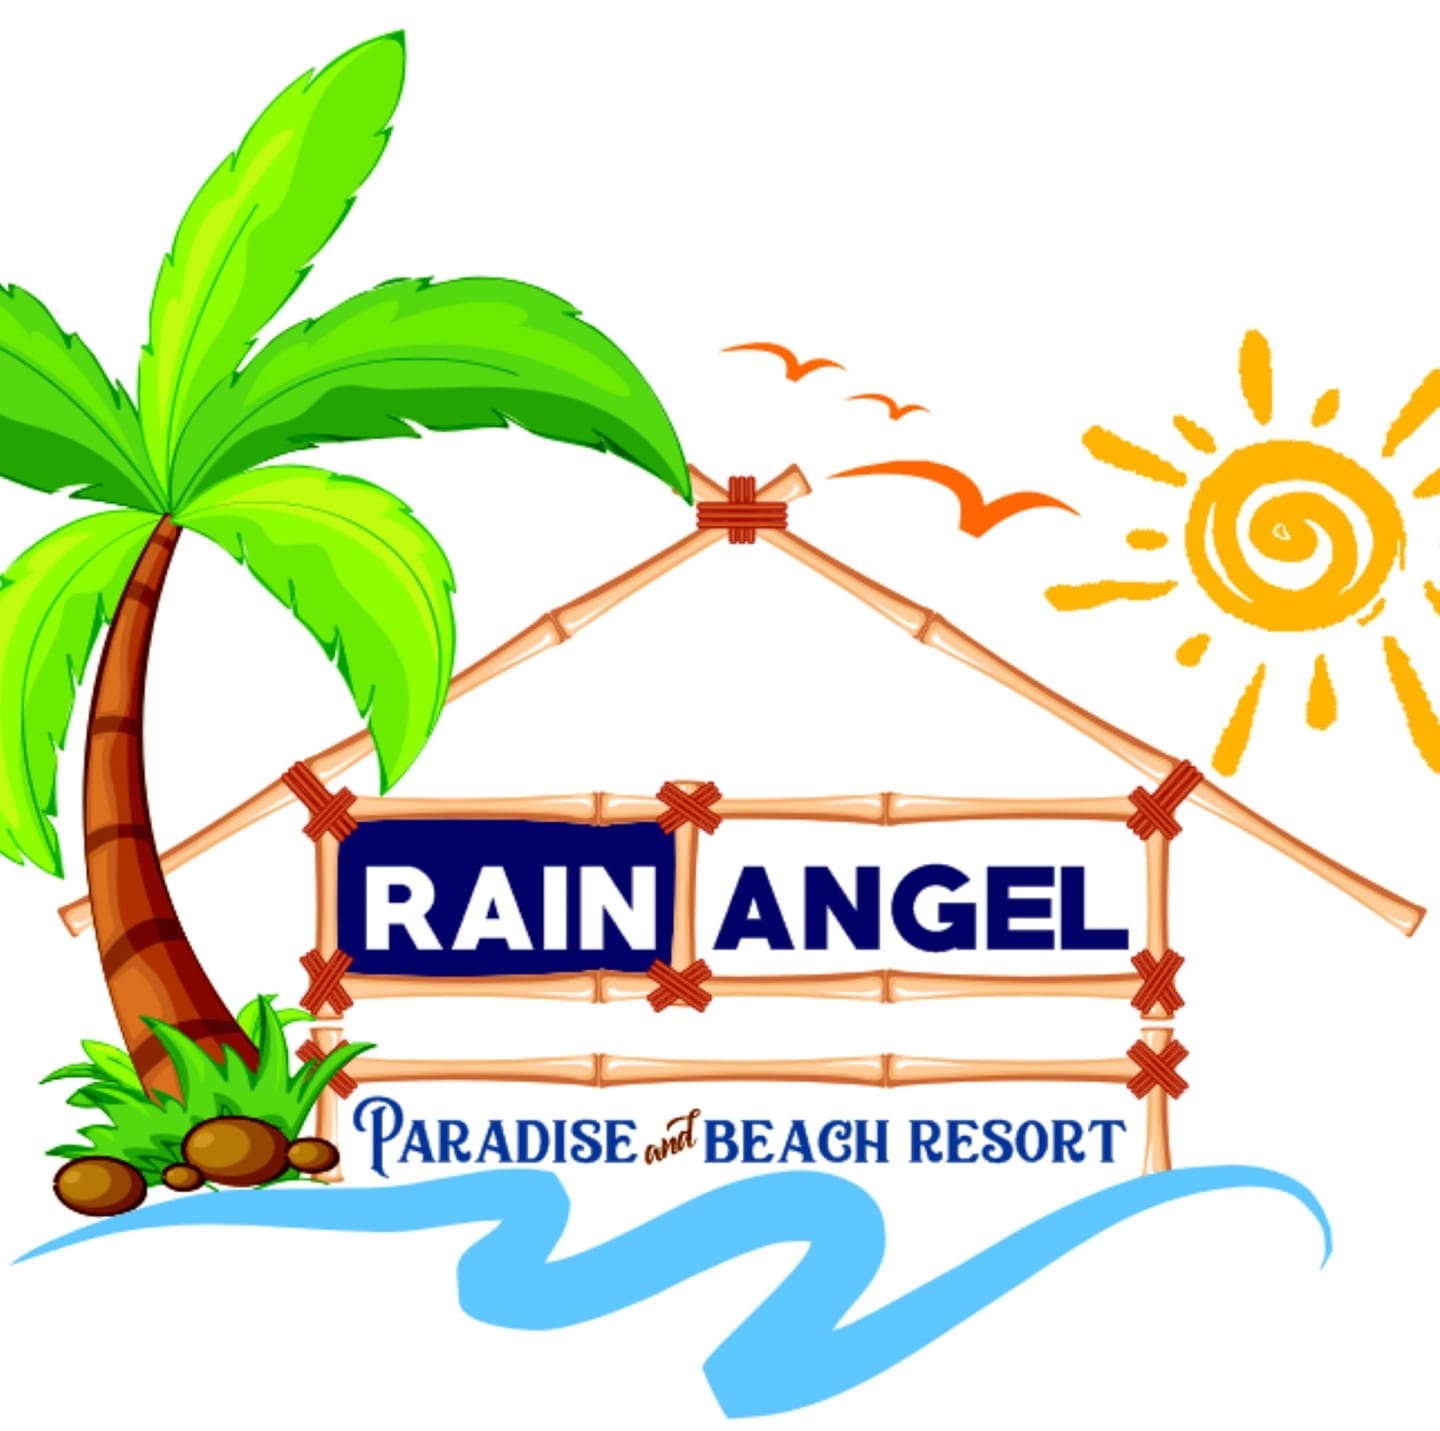 You are currently viewing Rain and Angel Paradise & Beach Resort – Davao De Oro